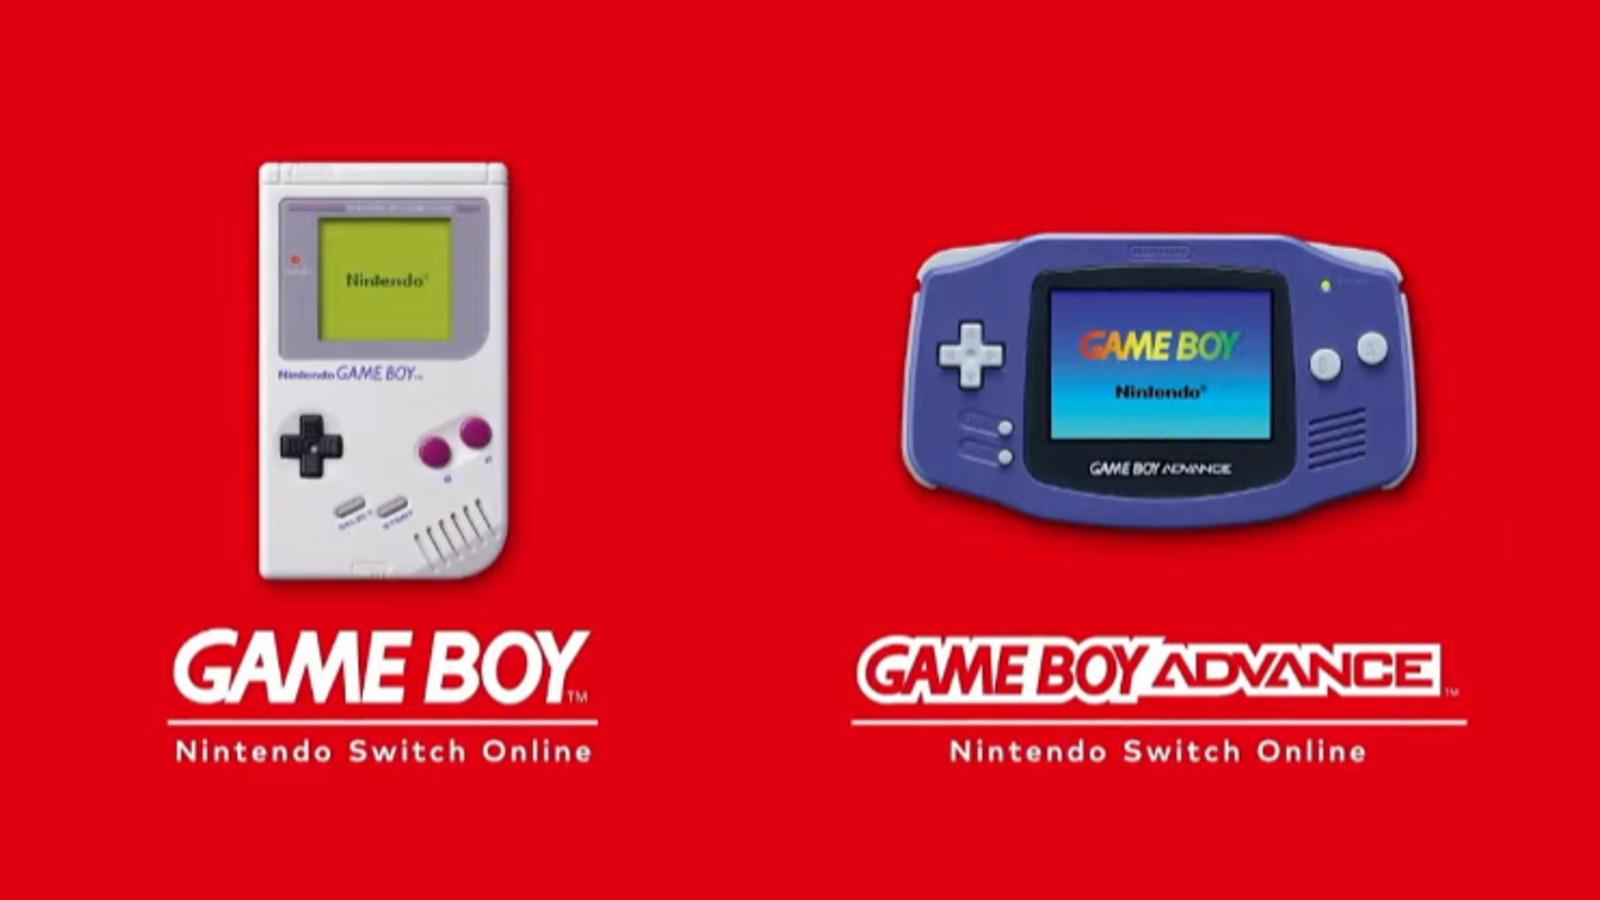 Nintendo Switch Online is bringing Gameboy, Gameboy Color, and Gameboy Advanced games into the modern day.